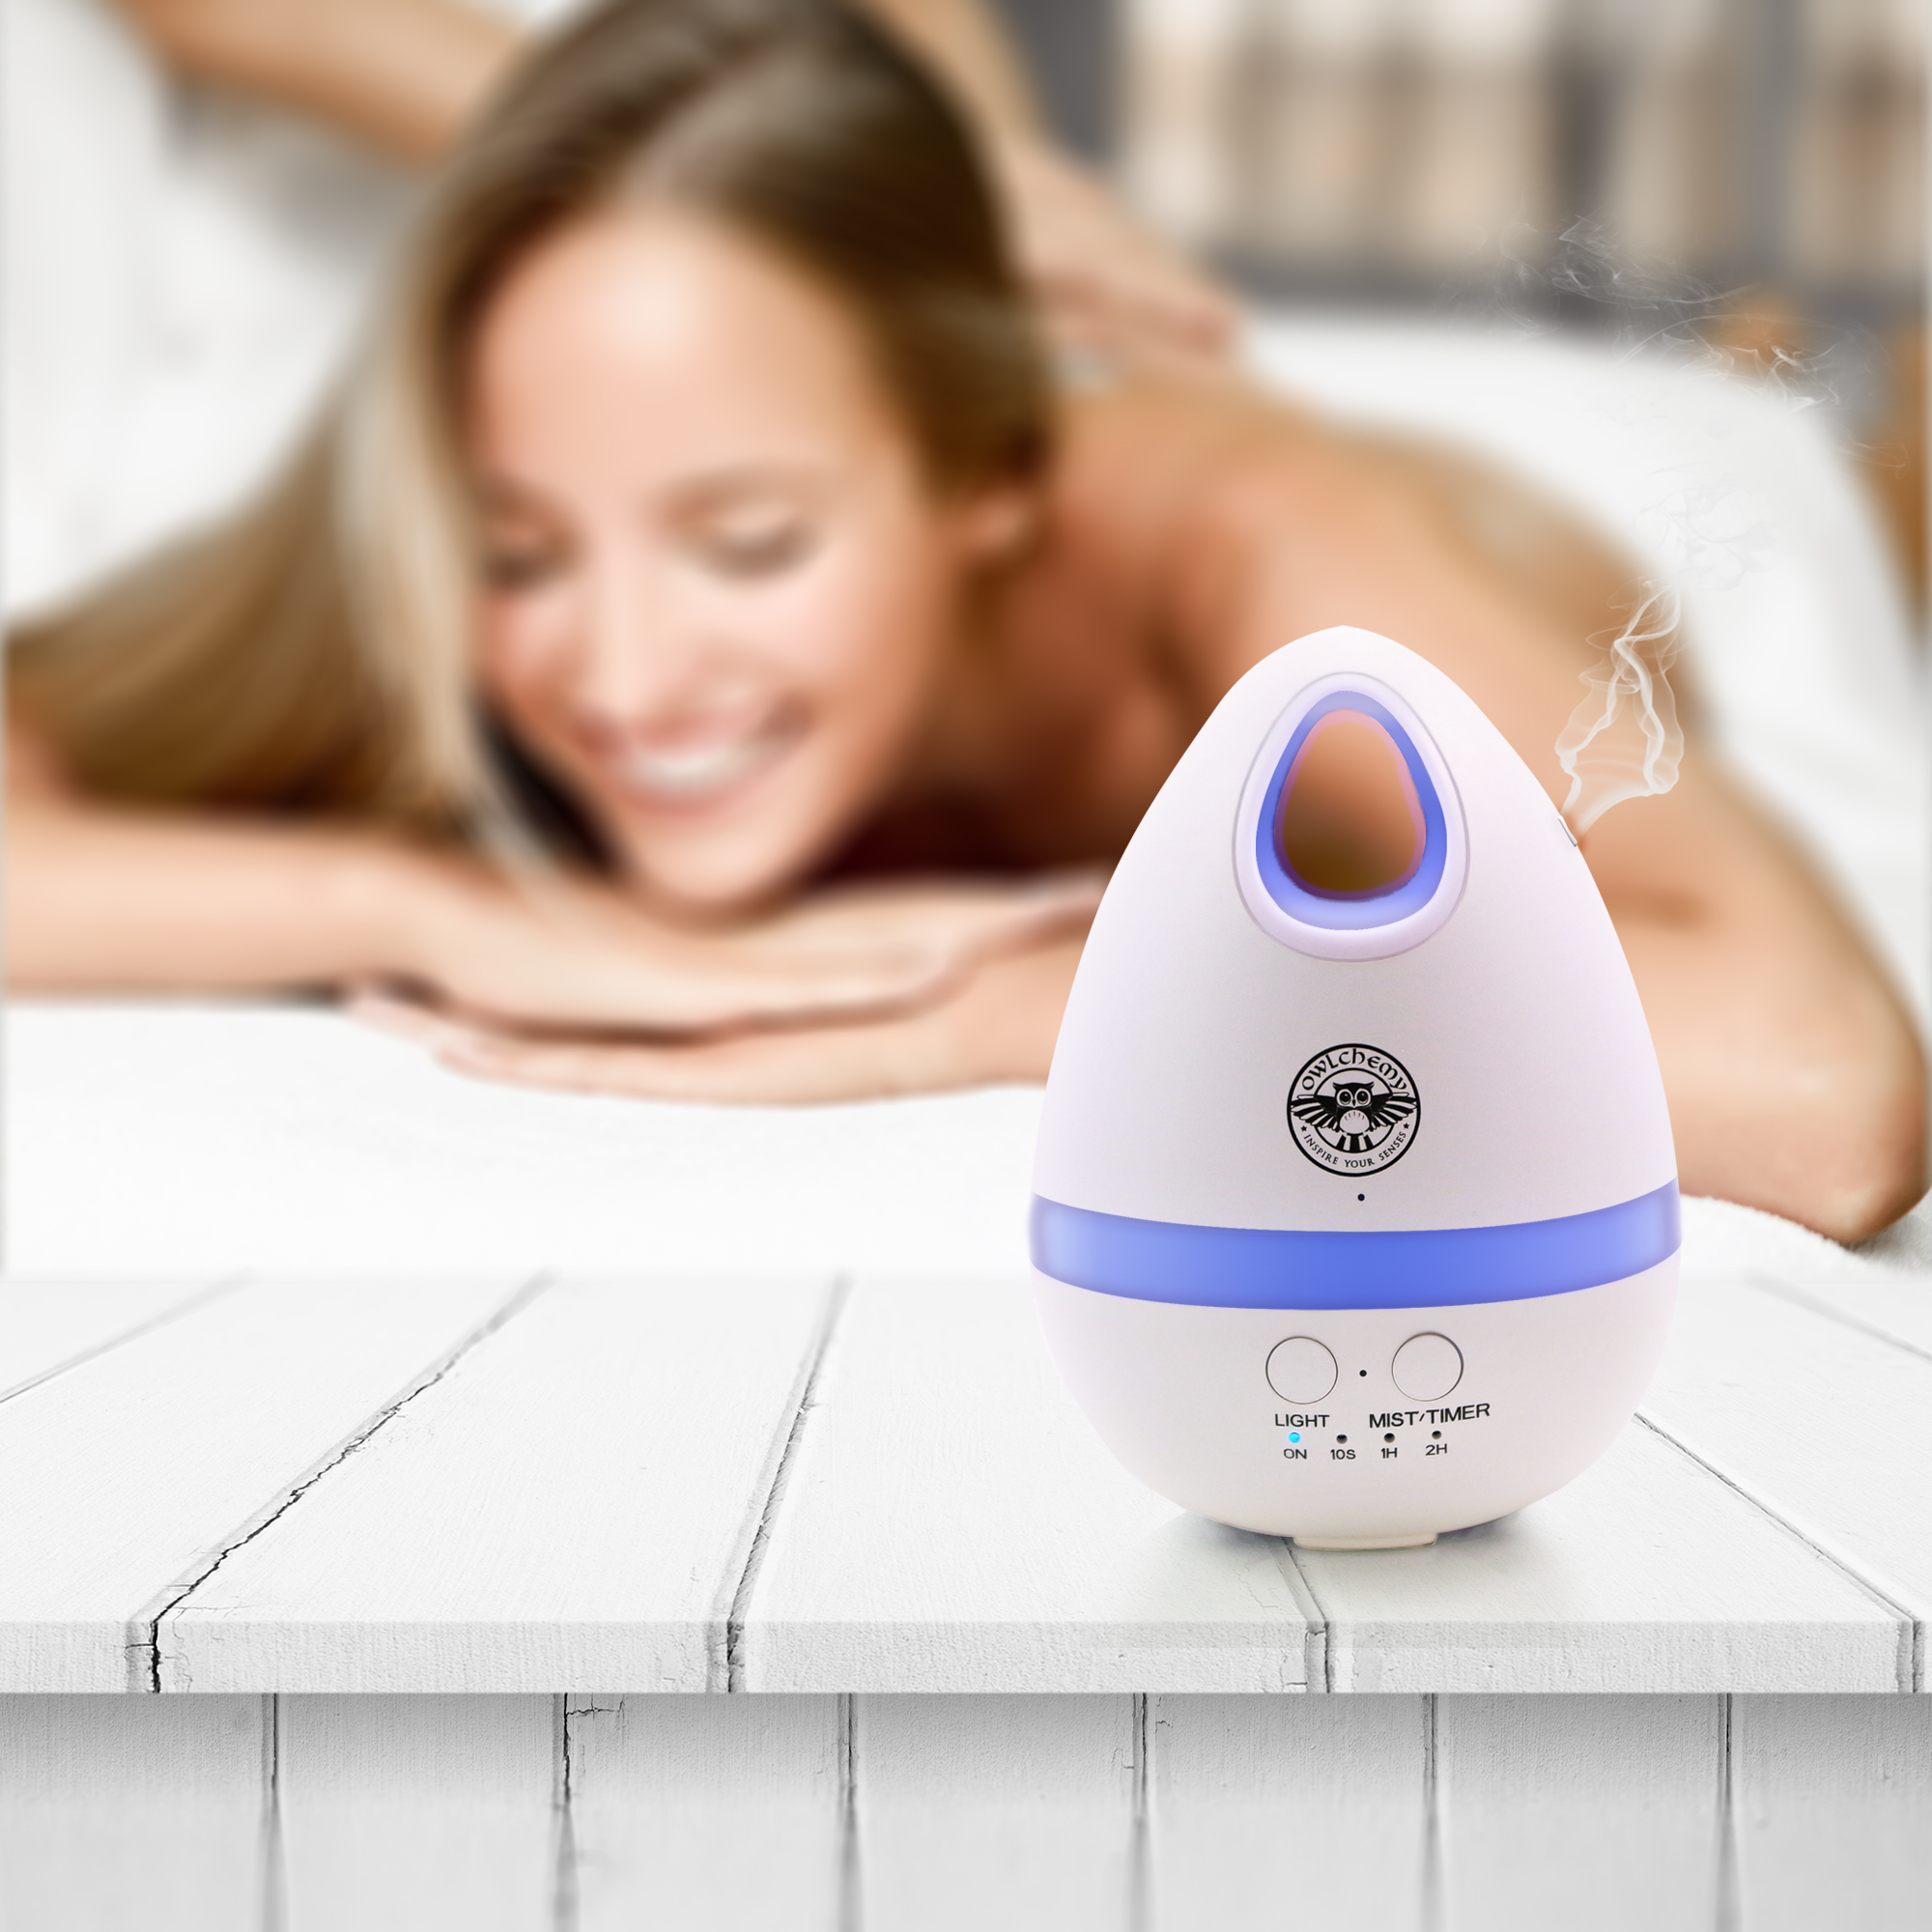 A woman laying on a bed behind our Electric Essential Oil Diffuser with Detox & Cleanse Essential Oils.